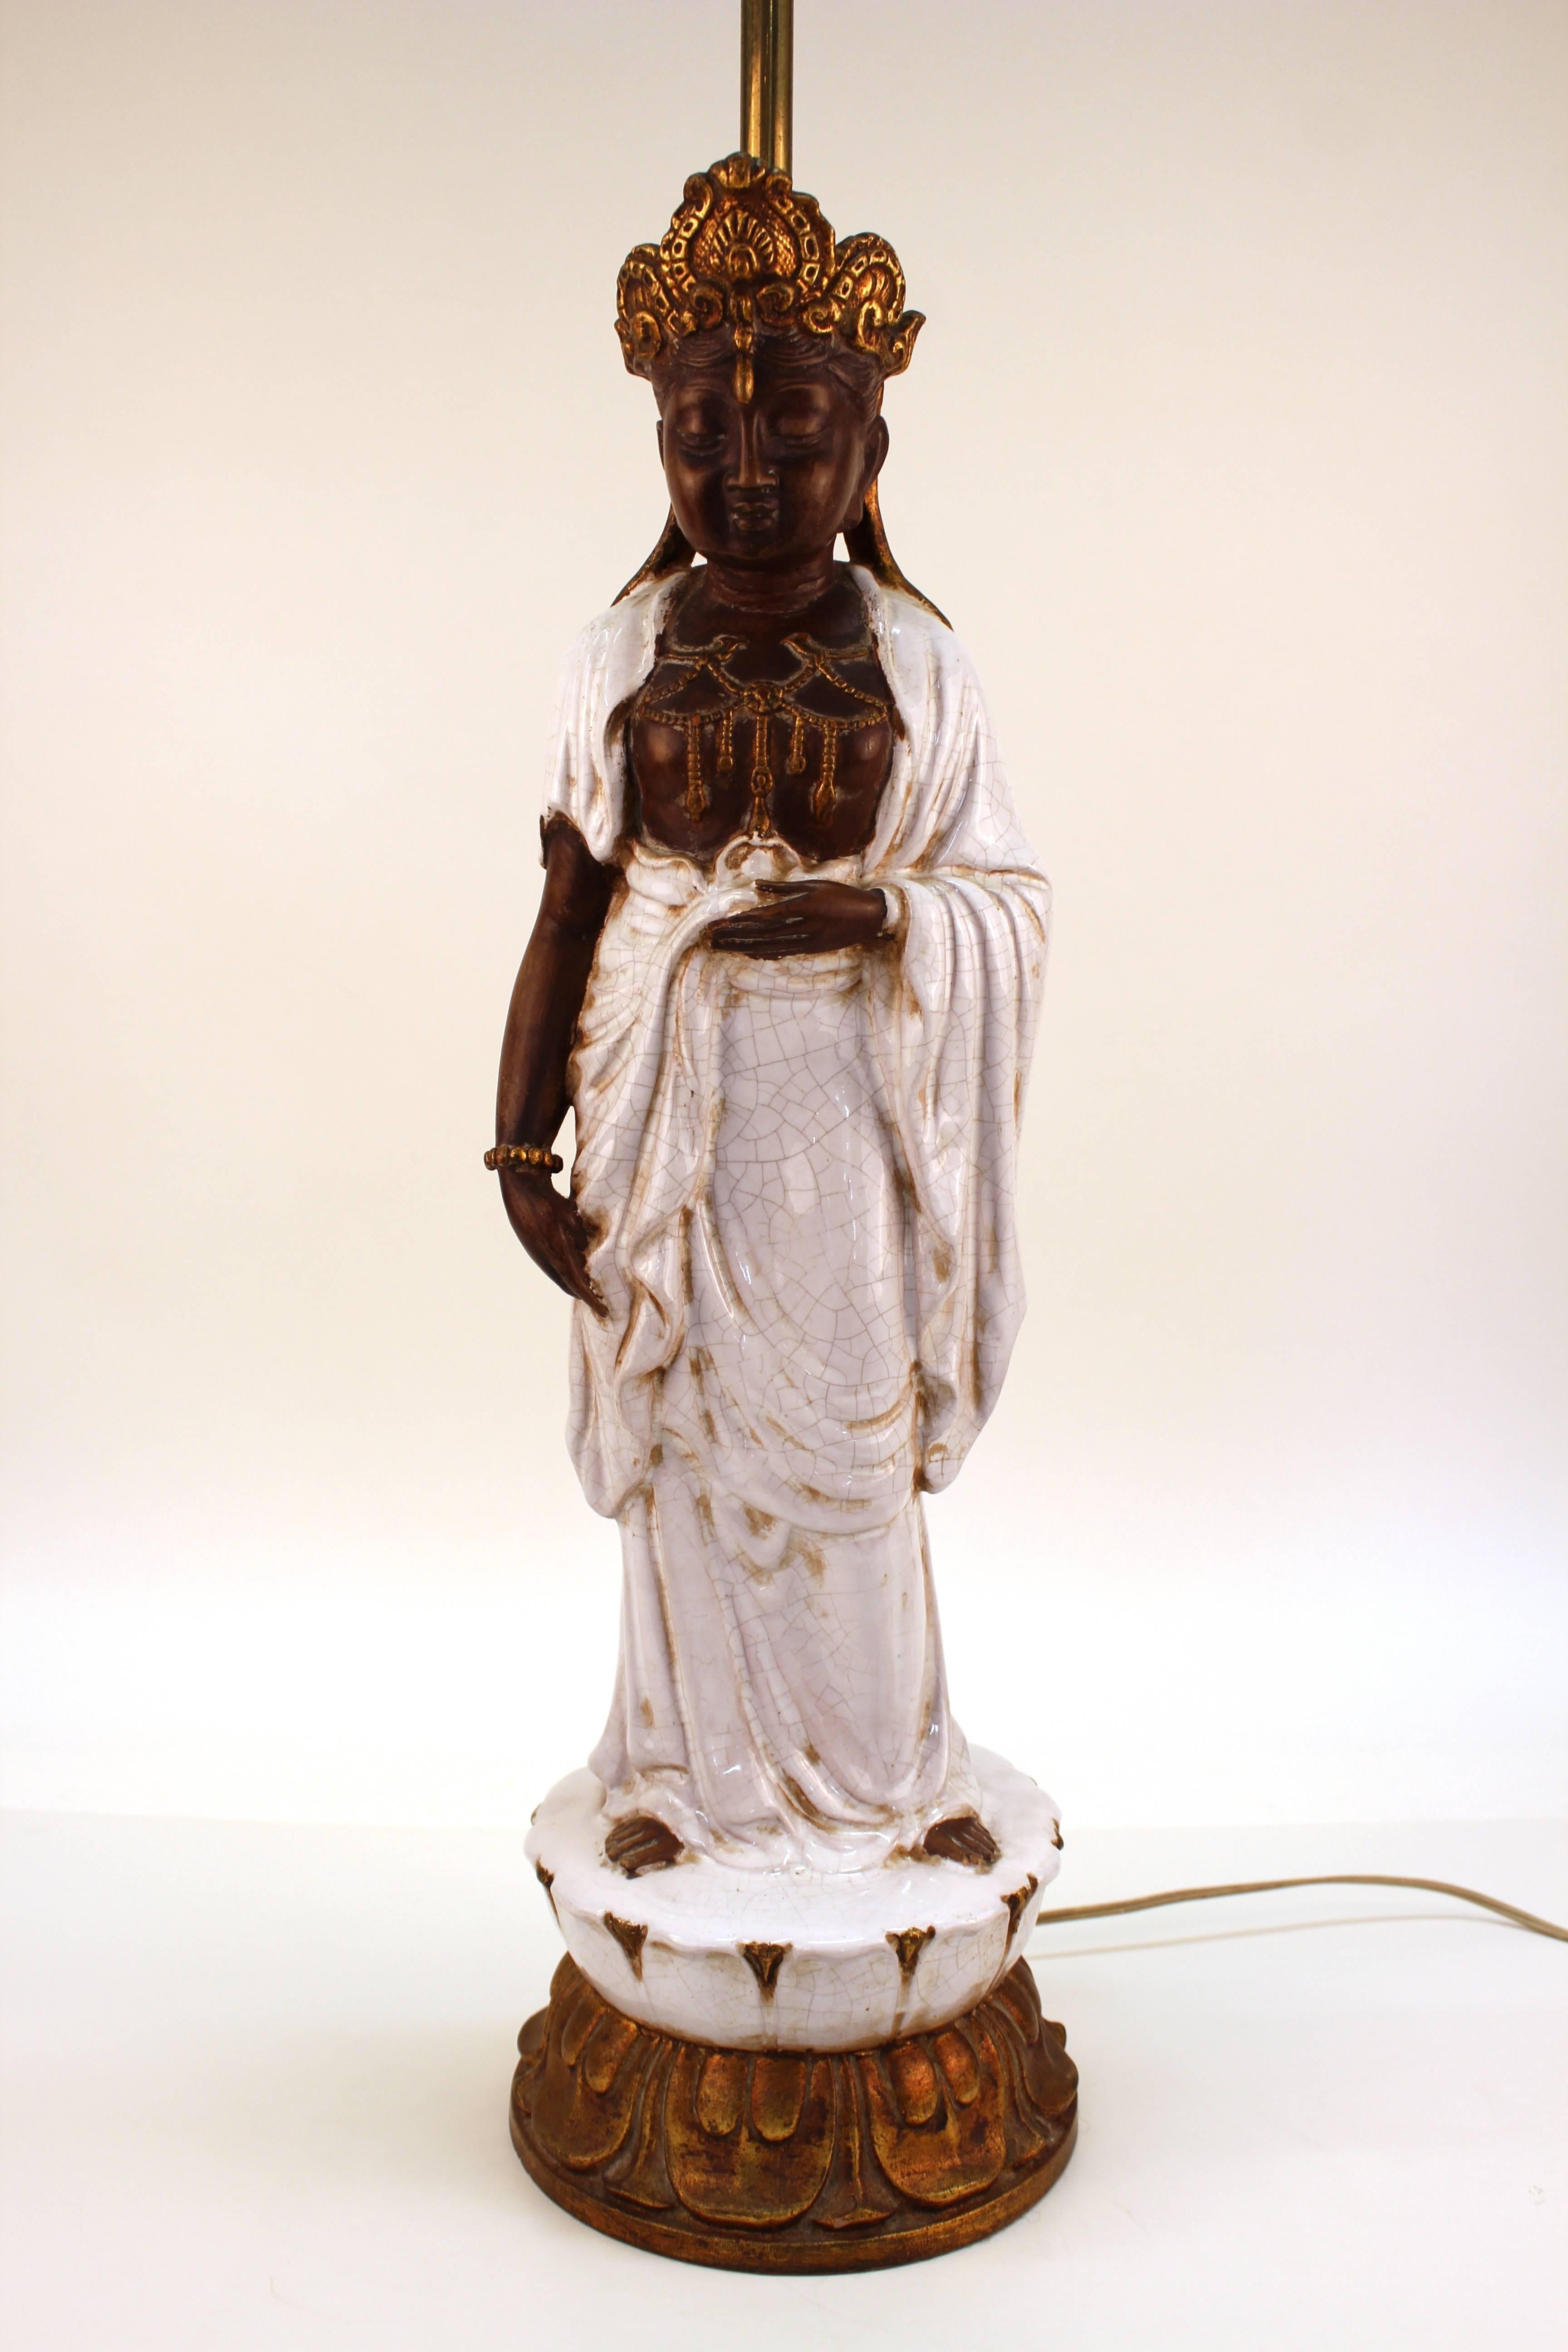 A Hollywood Regency table lamp made in glazed ceramic and depicting a standing Buddha. The piece was made in Italy and is marked on the inside border [VZ] [Italy]. In good vintage condition with some wear to the finish.